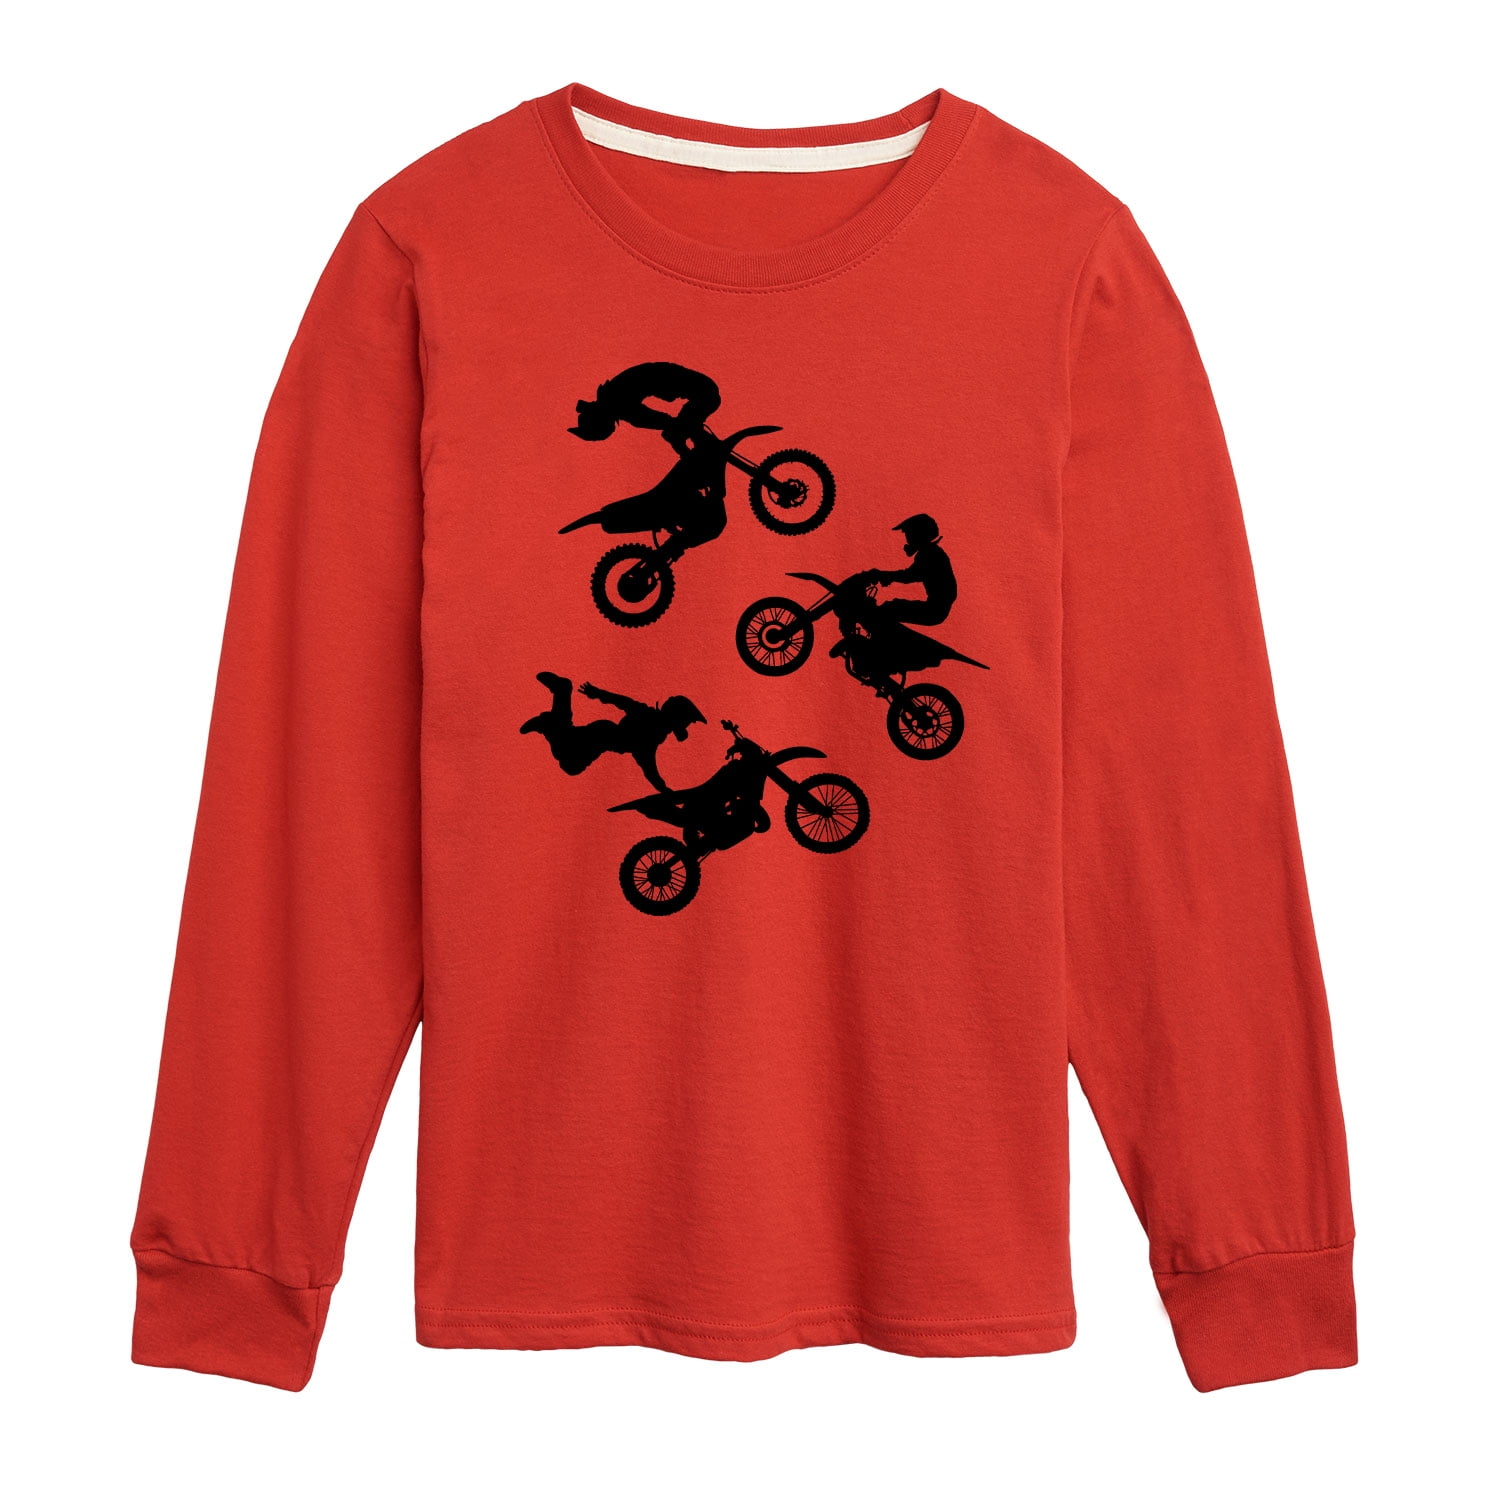 Instant Message - Dirt Bike Tricks - Toddler And Youth Long Sleeve Graphic T-Shirt